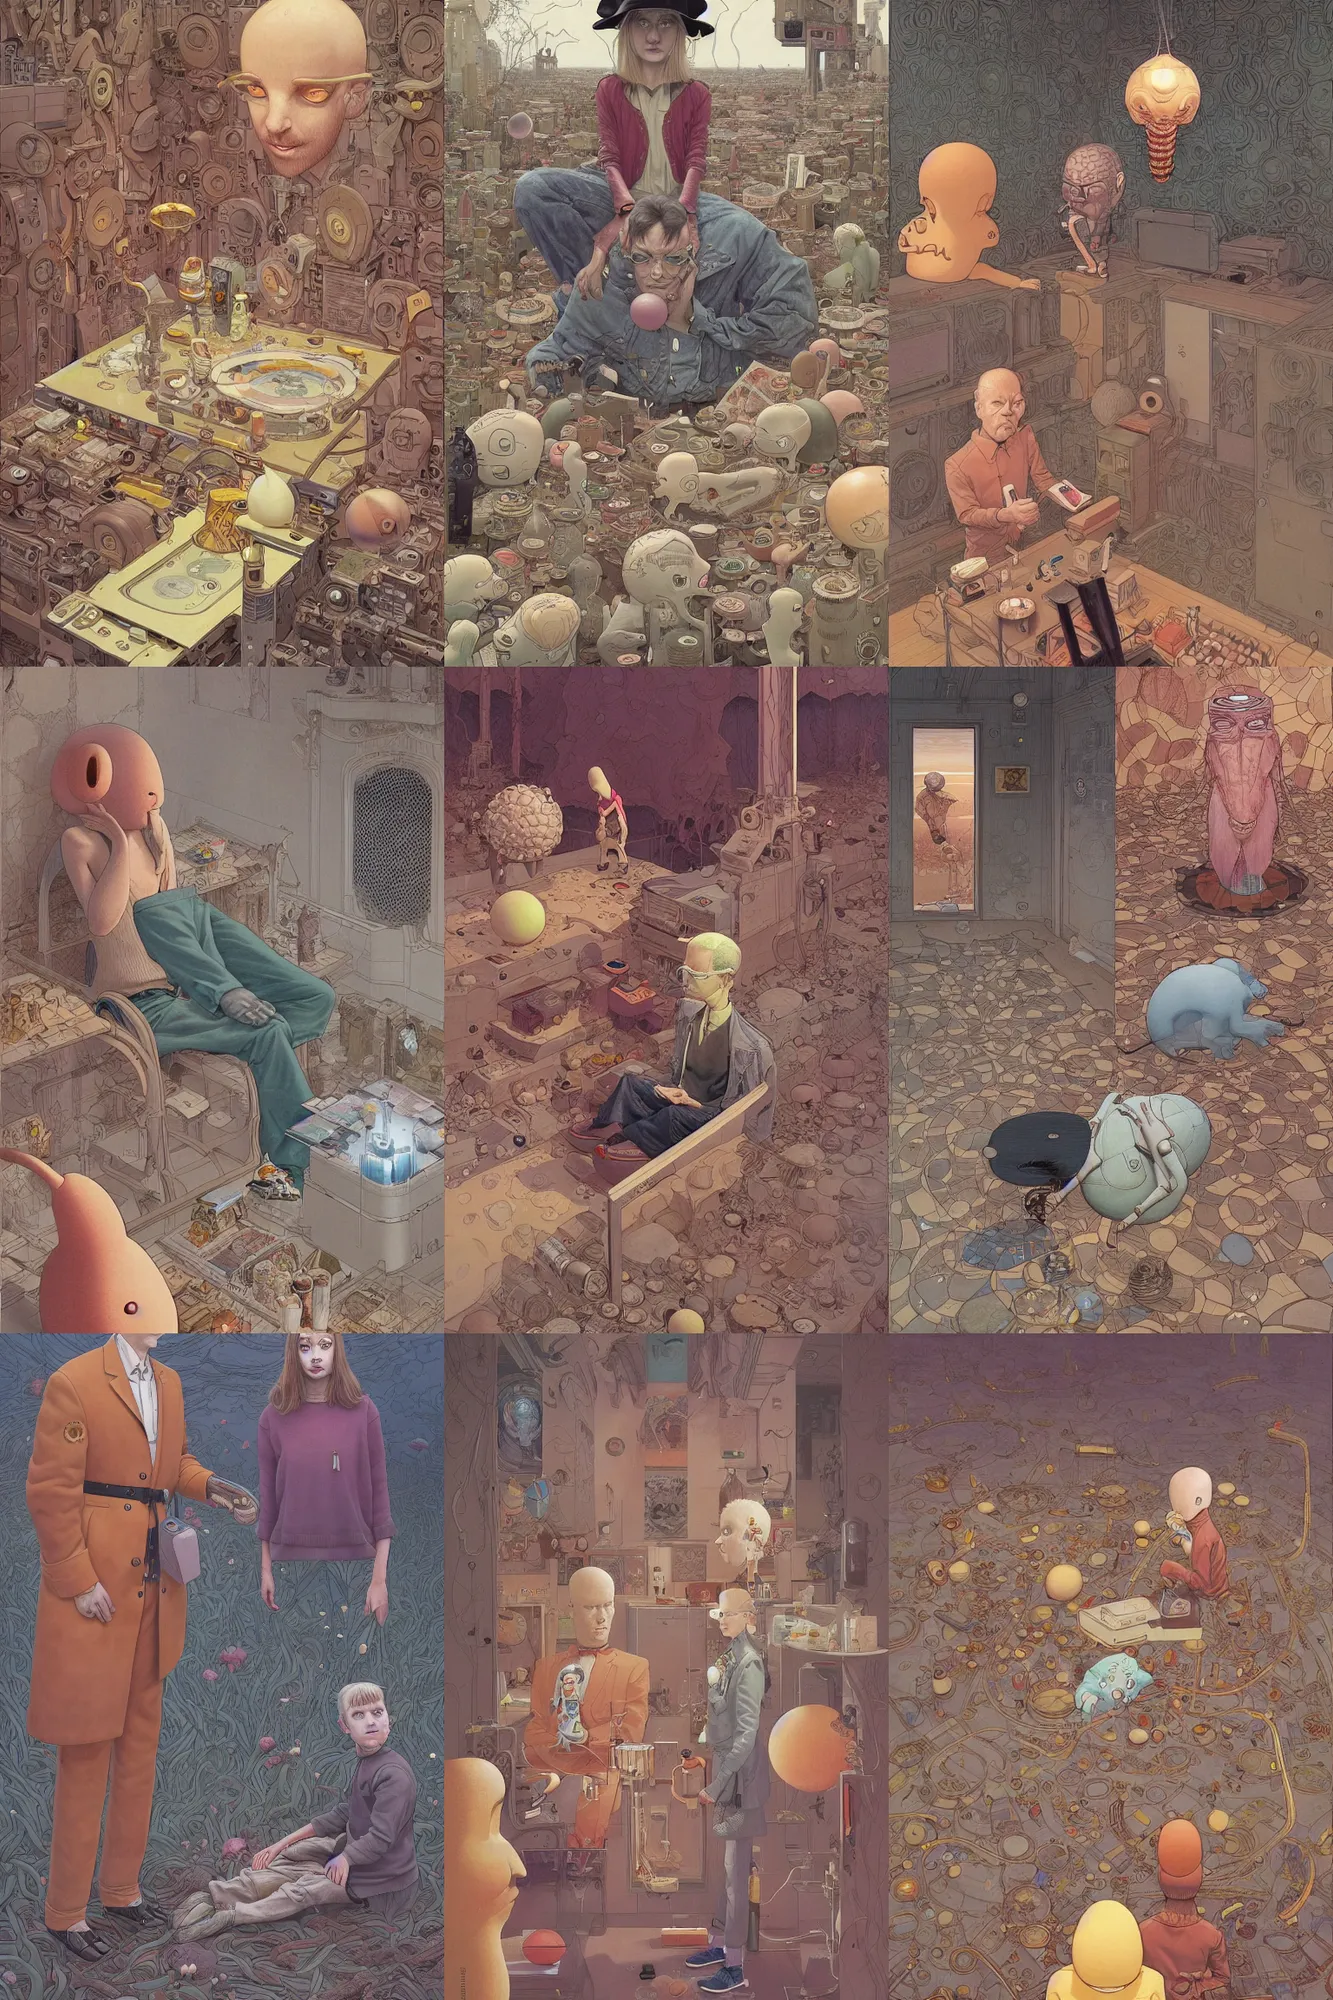 Prompt: the ego separates, by Moebius!!, (((by Daniel Clowes))), by Mattias Adolfsson, (by Mandy Jurgens), oil on canvas